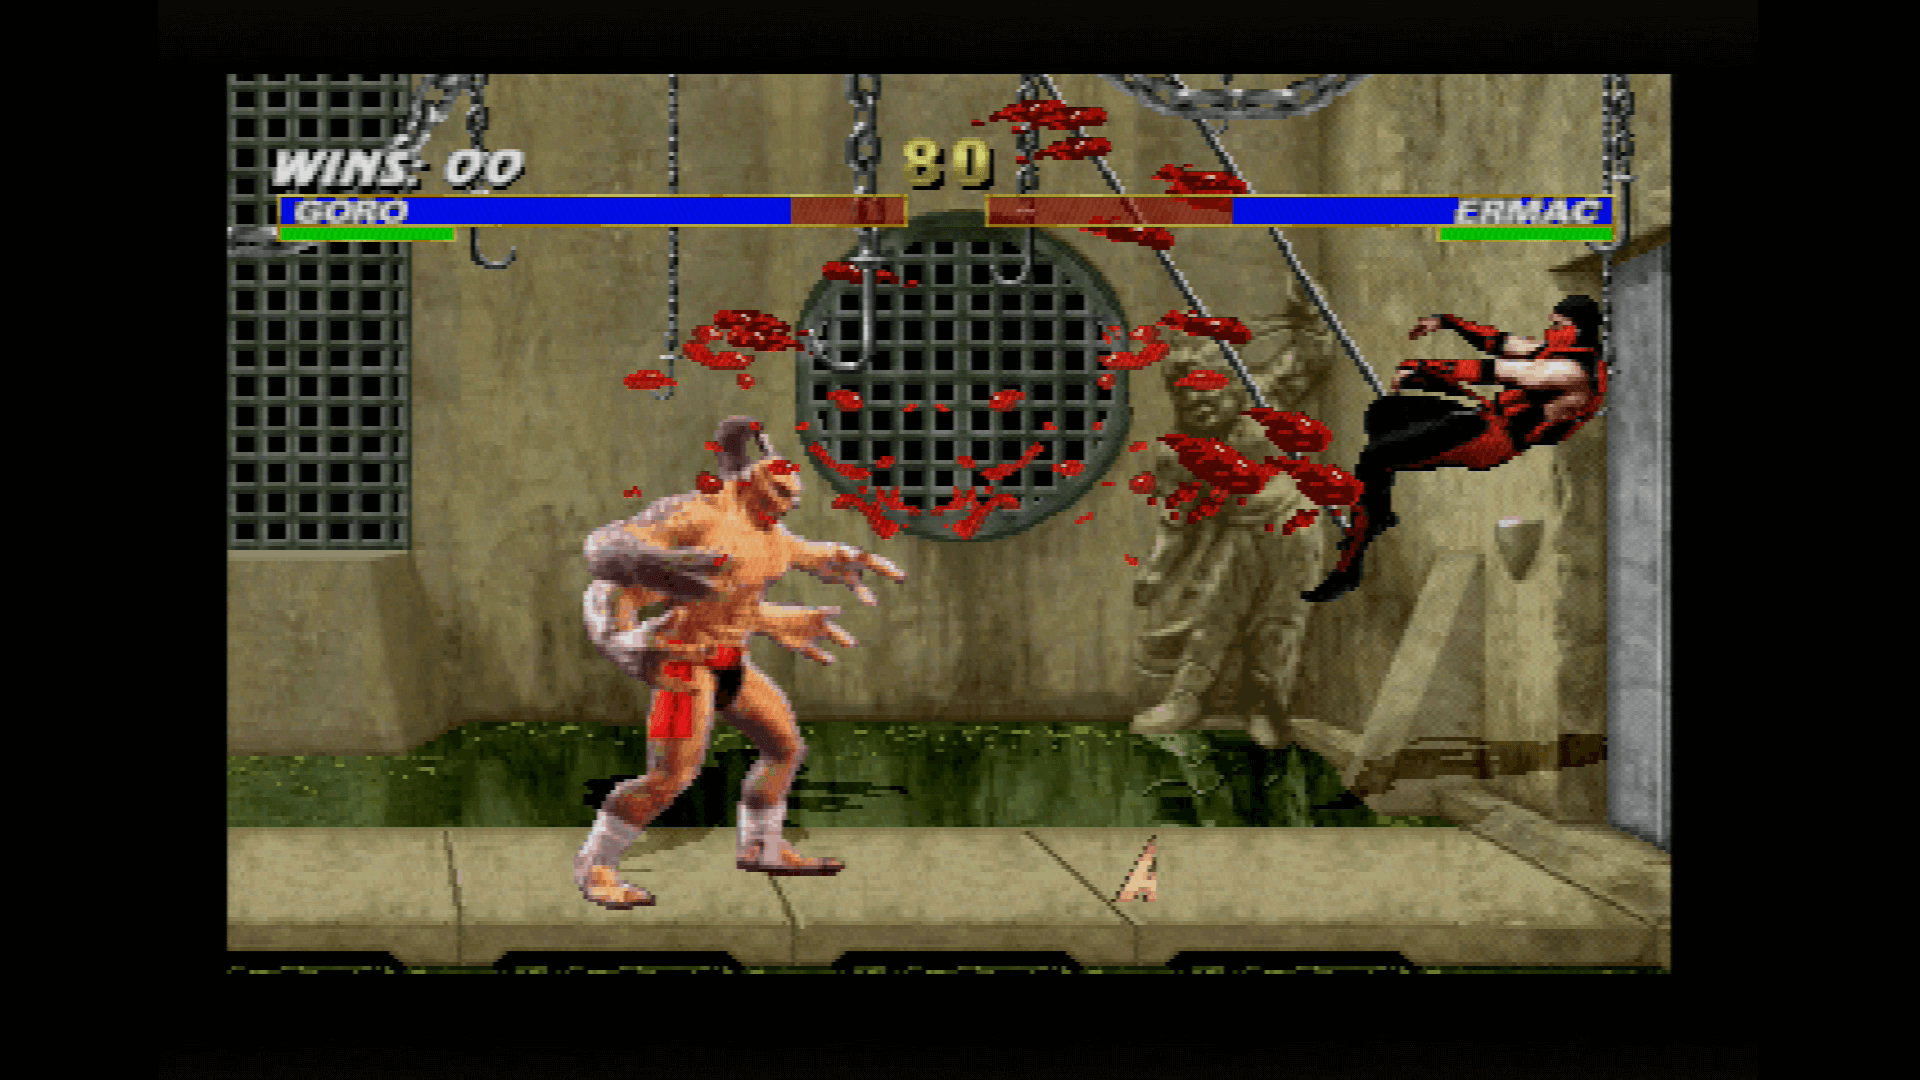 MK TRILOGY (1996/PS1) - ONE BUTTON FATALITY CODE 